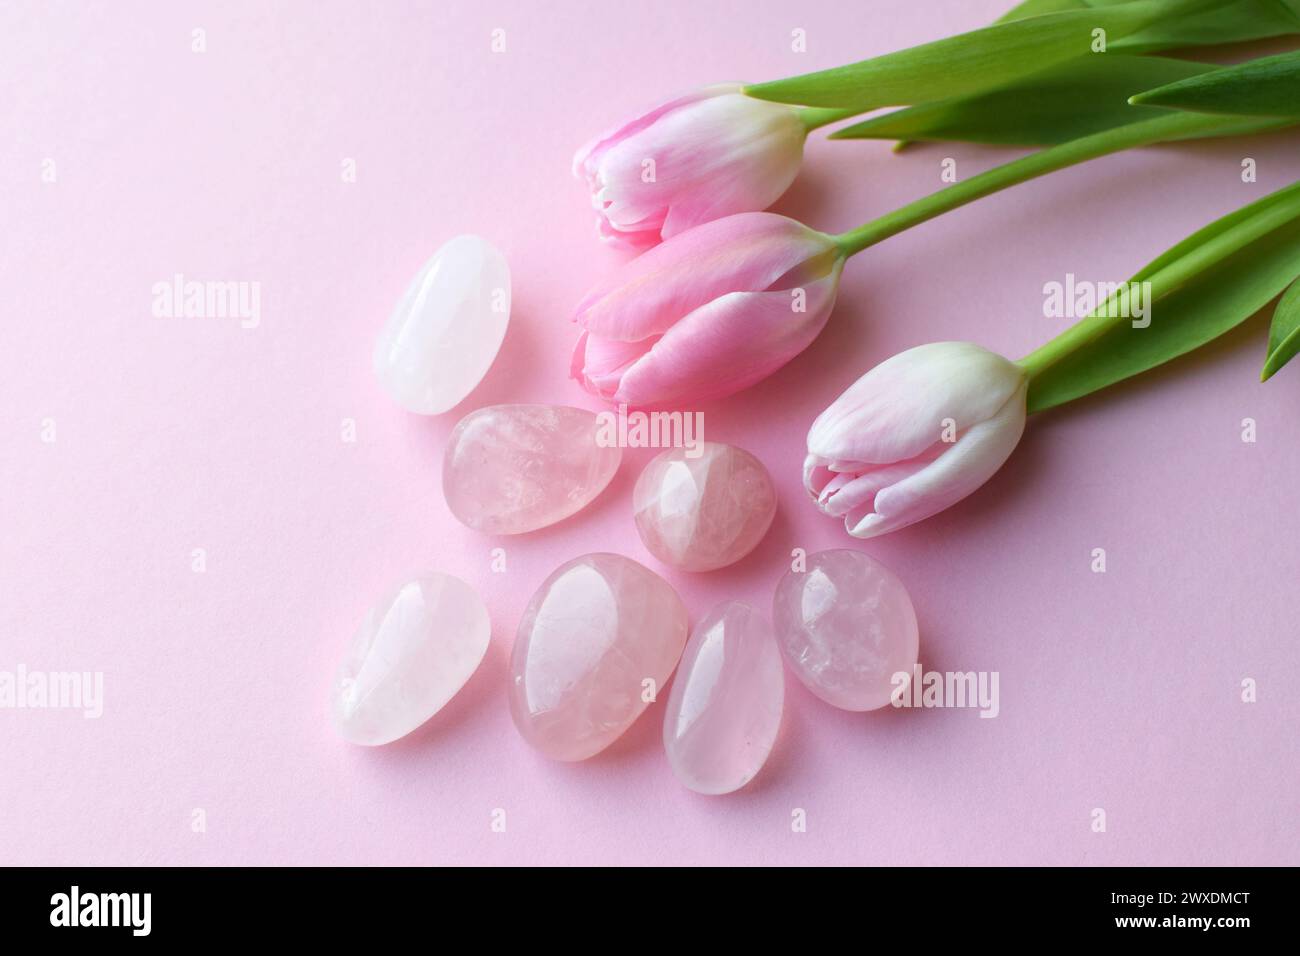 Rose quartz crystals and a bouquet of pink tulips. Healing crystals, the magic of precious stones. Stock Photo